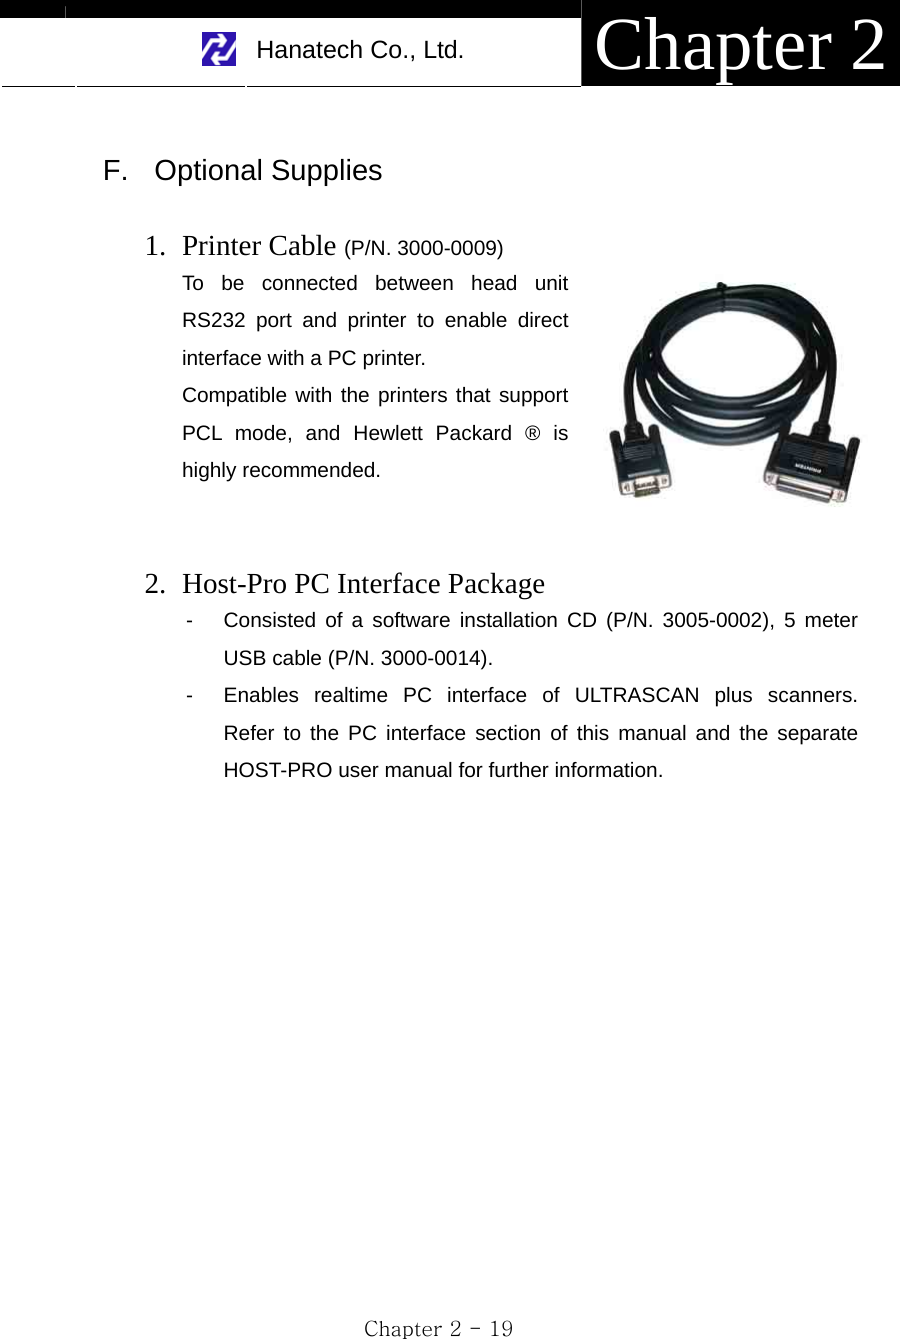     Hanatech Co., Ltd.  Chapter 2 Chapter 2 - 19  F. Optional Supplies  1. Printer Cable (P/N. 3000-0009) To be connected between head unit RS232 port and printer to enable direct interface with a PC printer. Compatible with the printers that support PCL mode, and Hewlett Packard ® is highly recommended.   2. Host-Pro PC Interface Package   -  Consisted of a software installation CD (P/N. 3005-0002), 5 meter USB cable (P/N. 3000-0014). -  Enables realtime PC interface of ULTRASCAN plus scanners.  Refer to the PC interface section of this manual and the separate HOST-PRO user manual for further information.                    